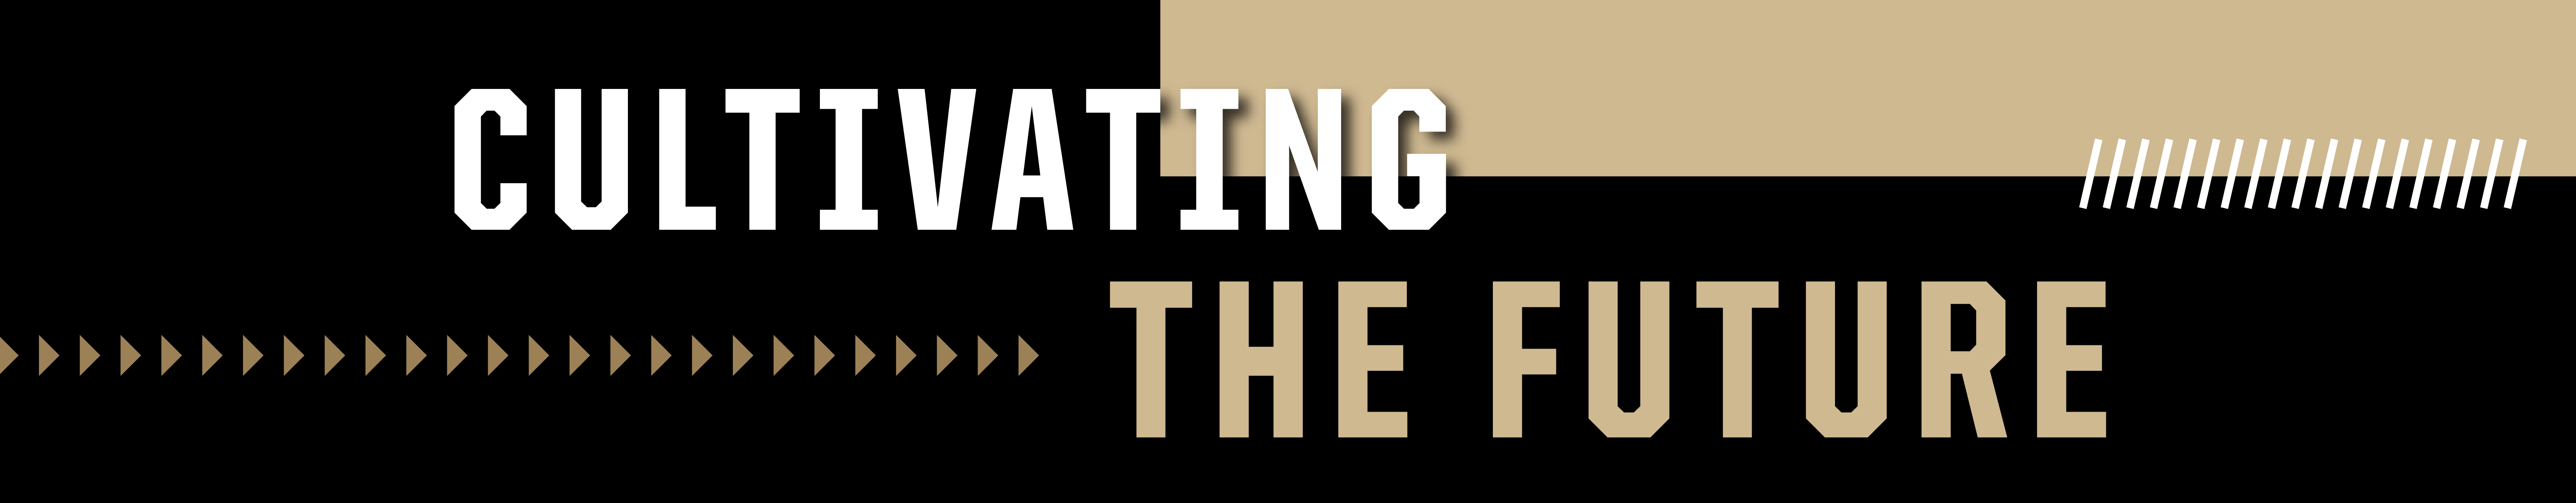 Cultivating the Future Banner 